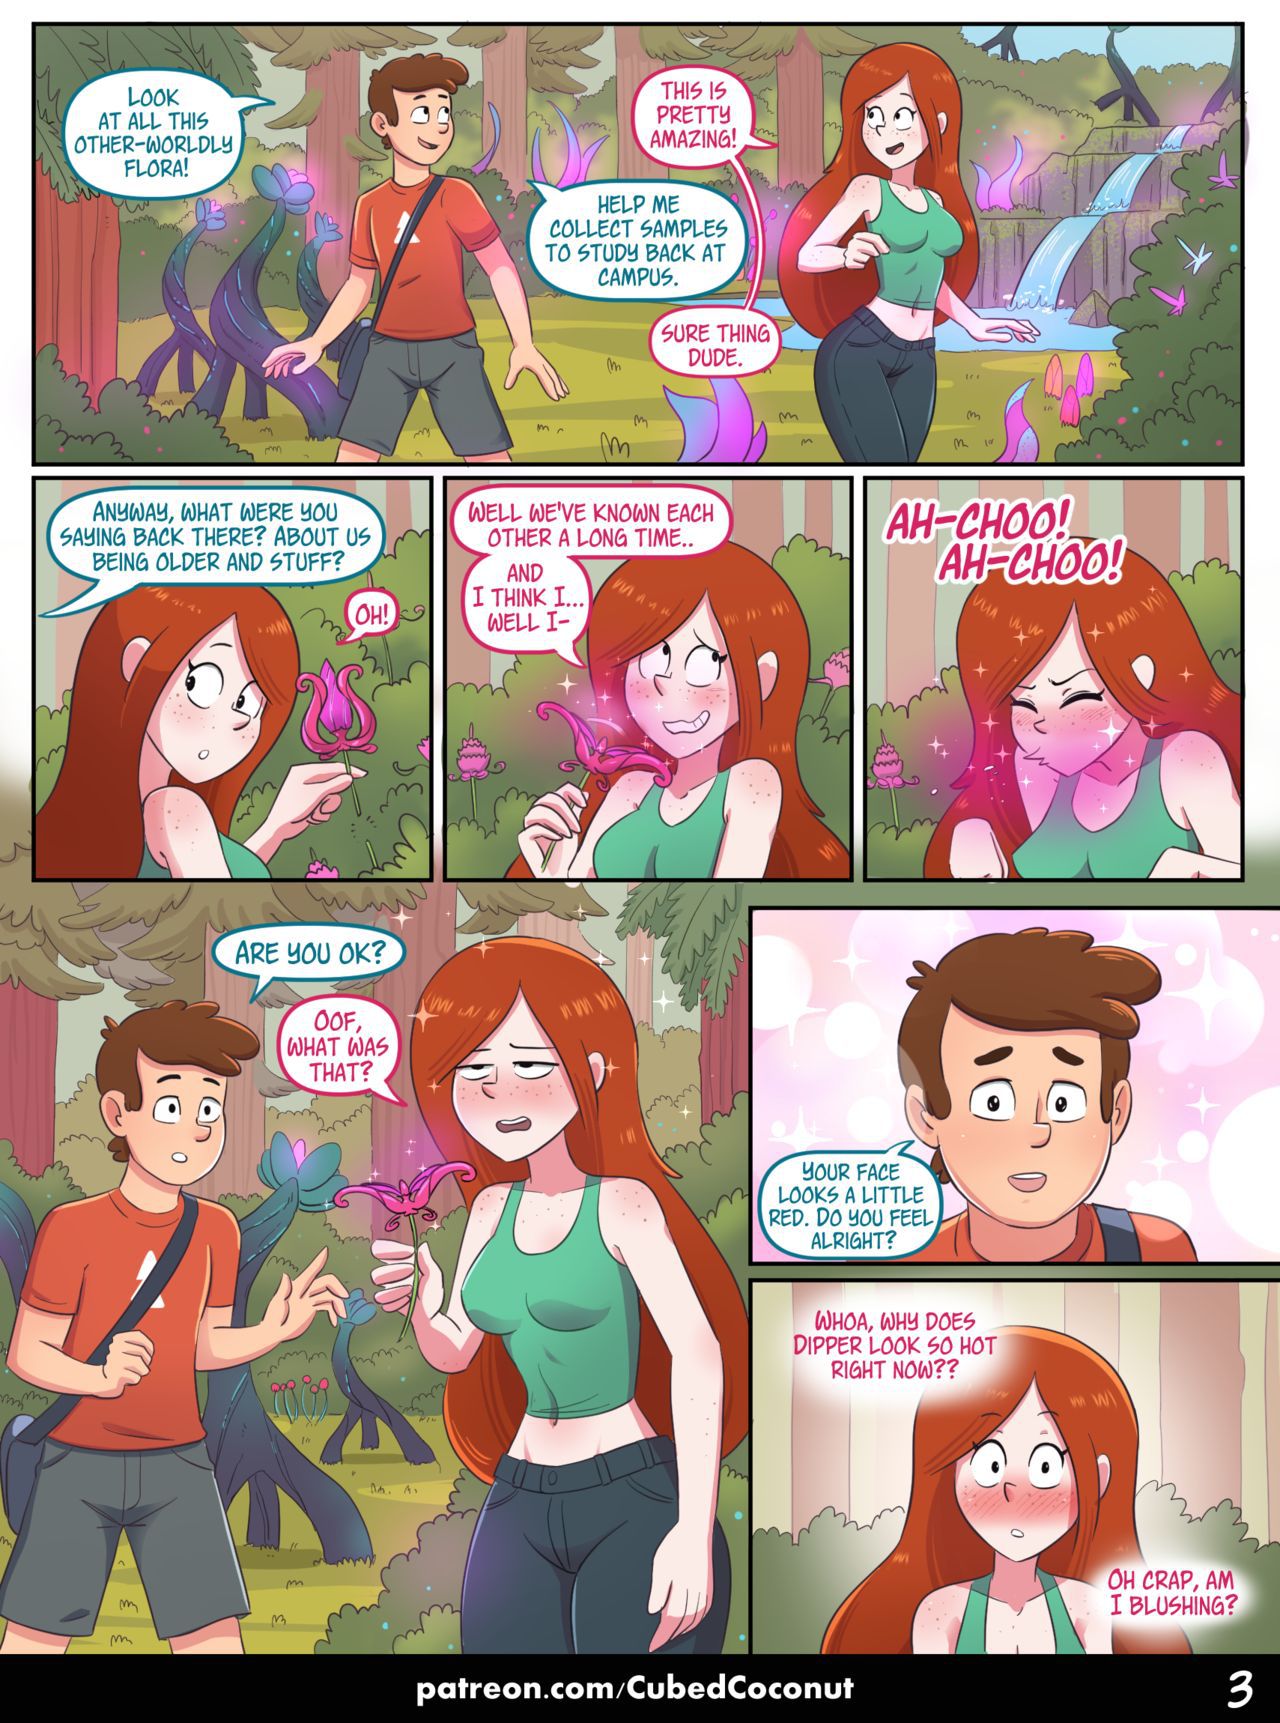 [Cubed Coconut] Wendy's Confession (Gravity Falls) [Ongoing] 4